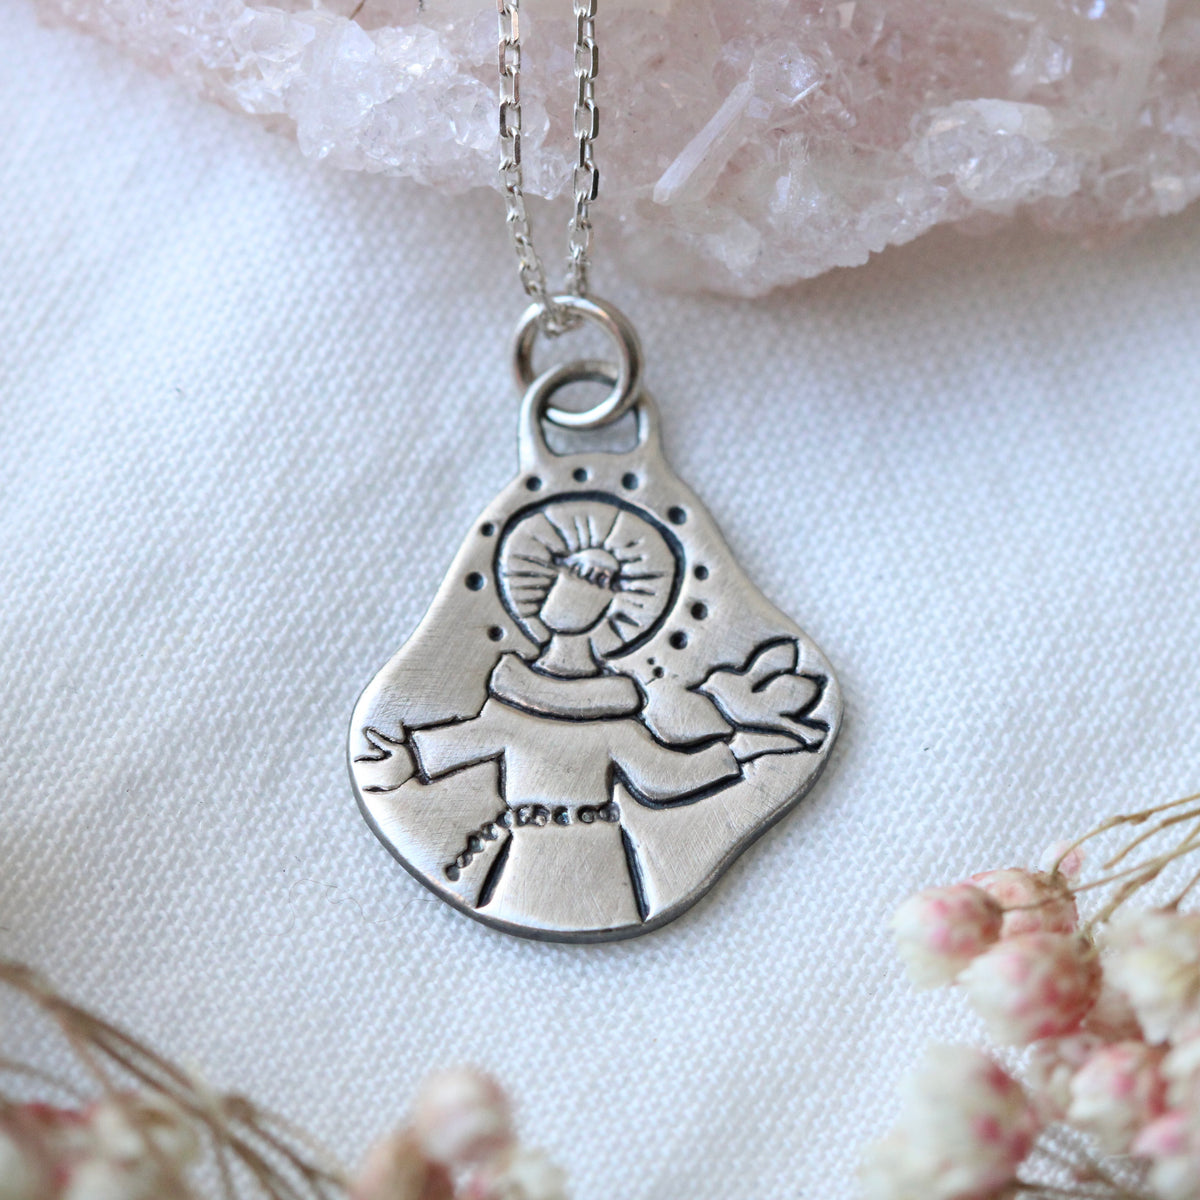 Saint Francis of Assisi Medallion necklace